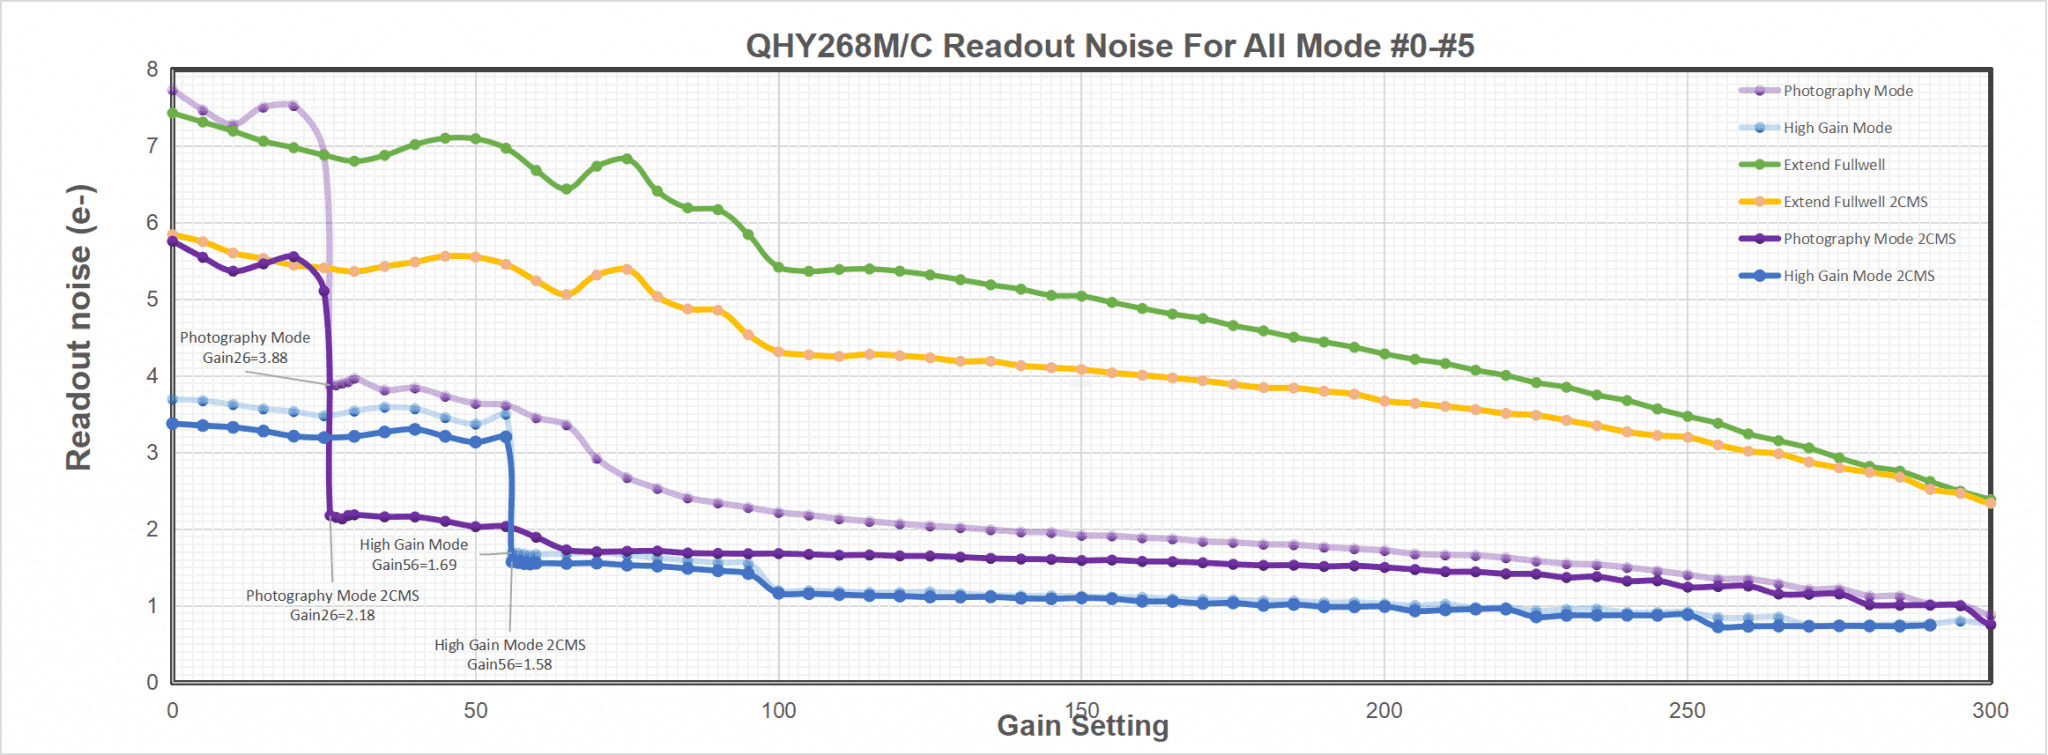 QHY268M/C Readout Noise For All Mode